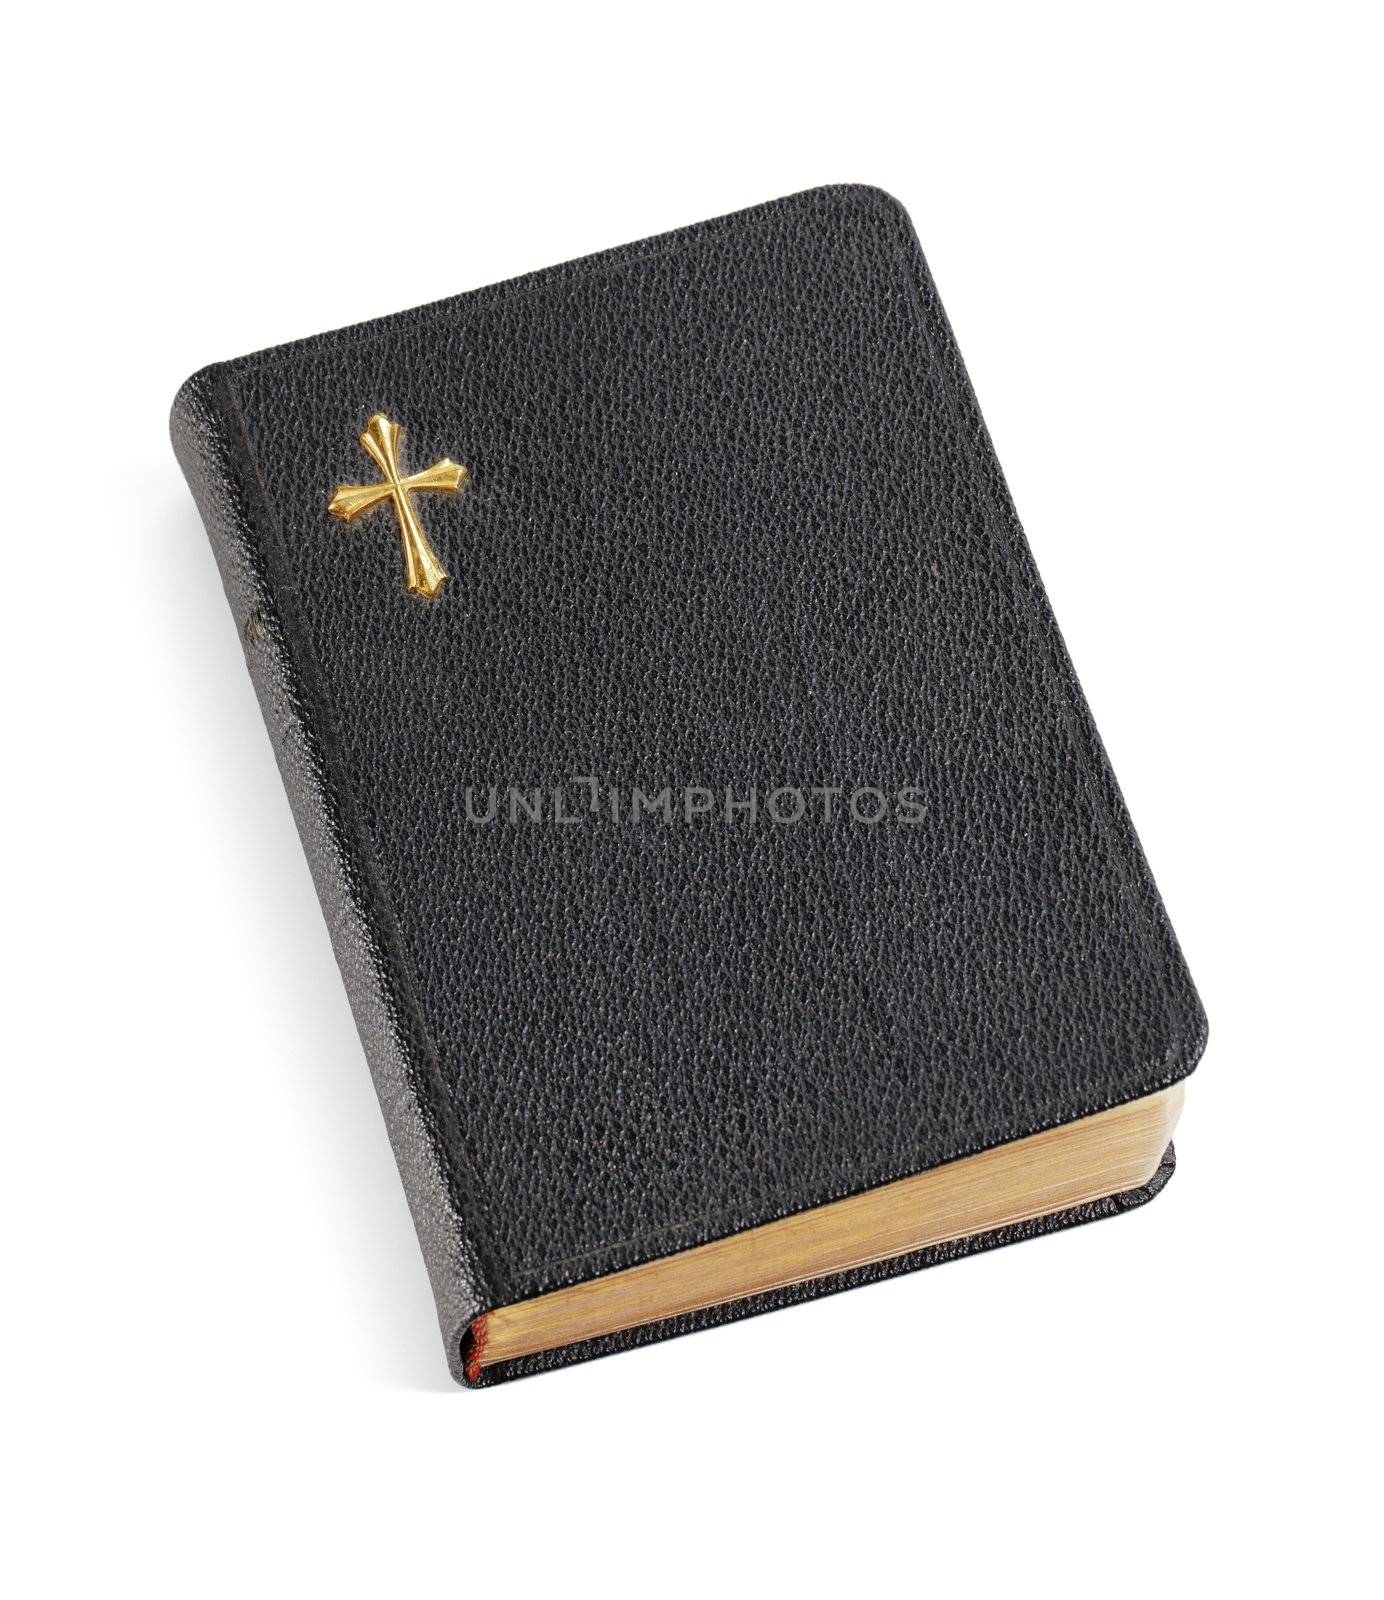 An old pocket-sized black bible isolated on white eith natural shadows